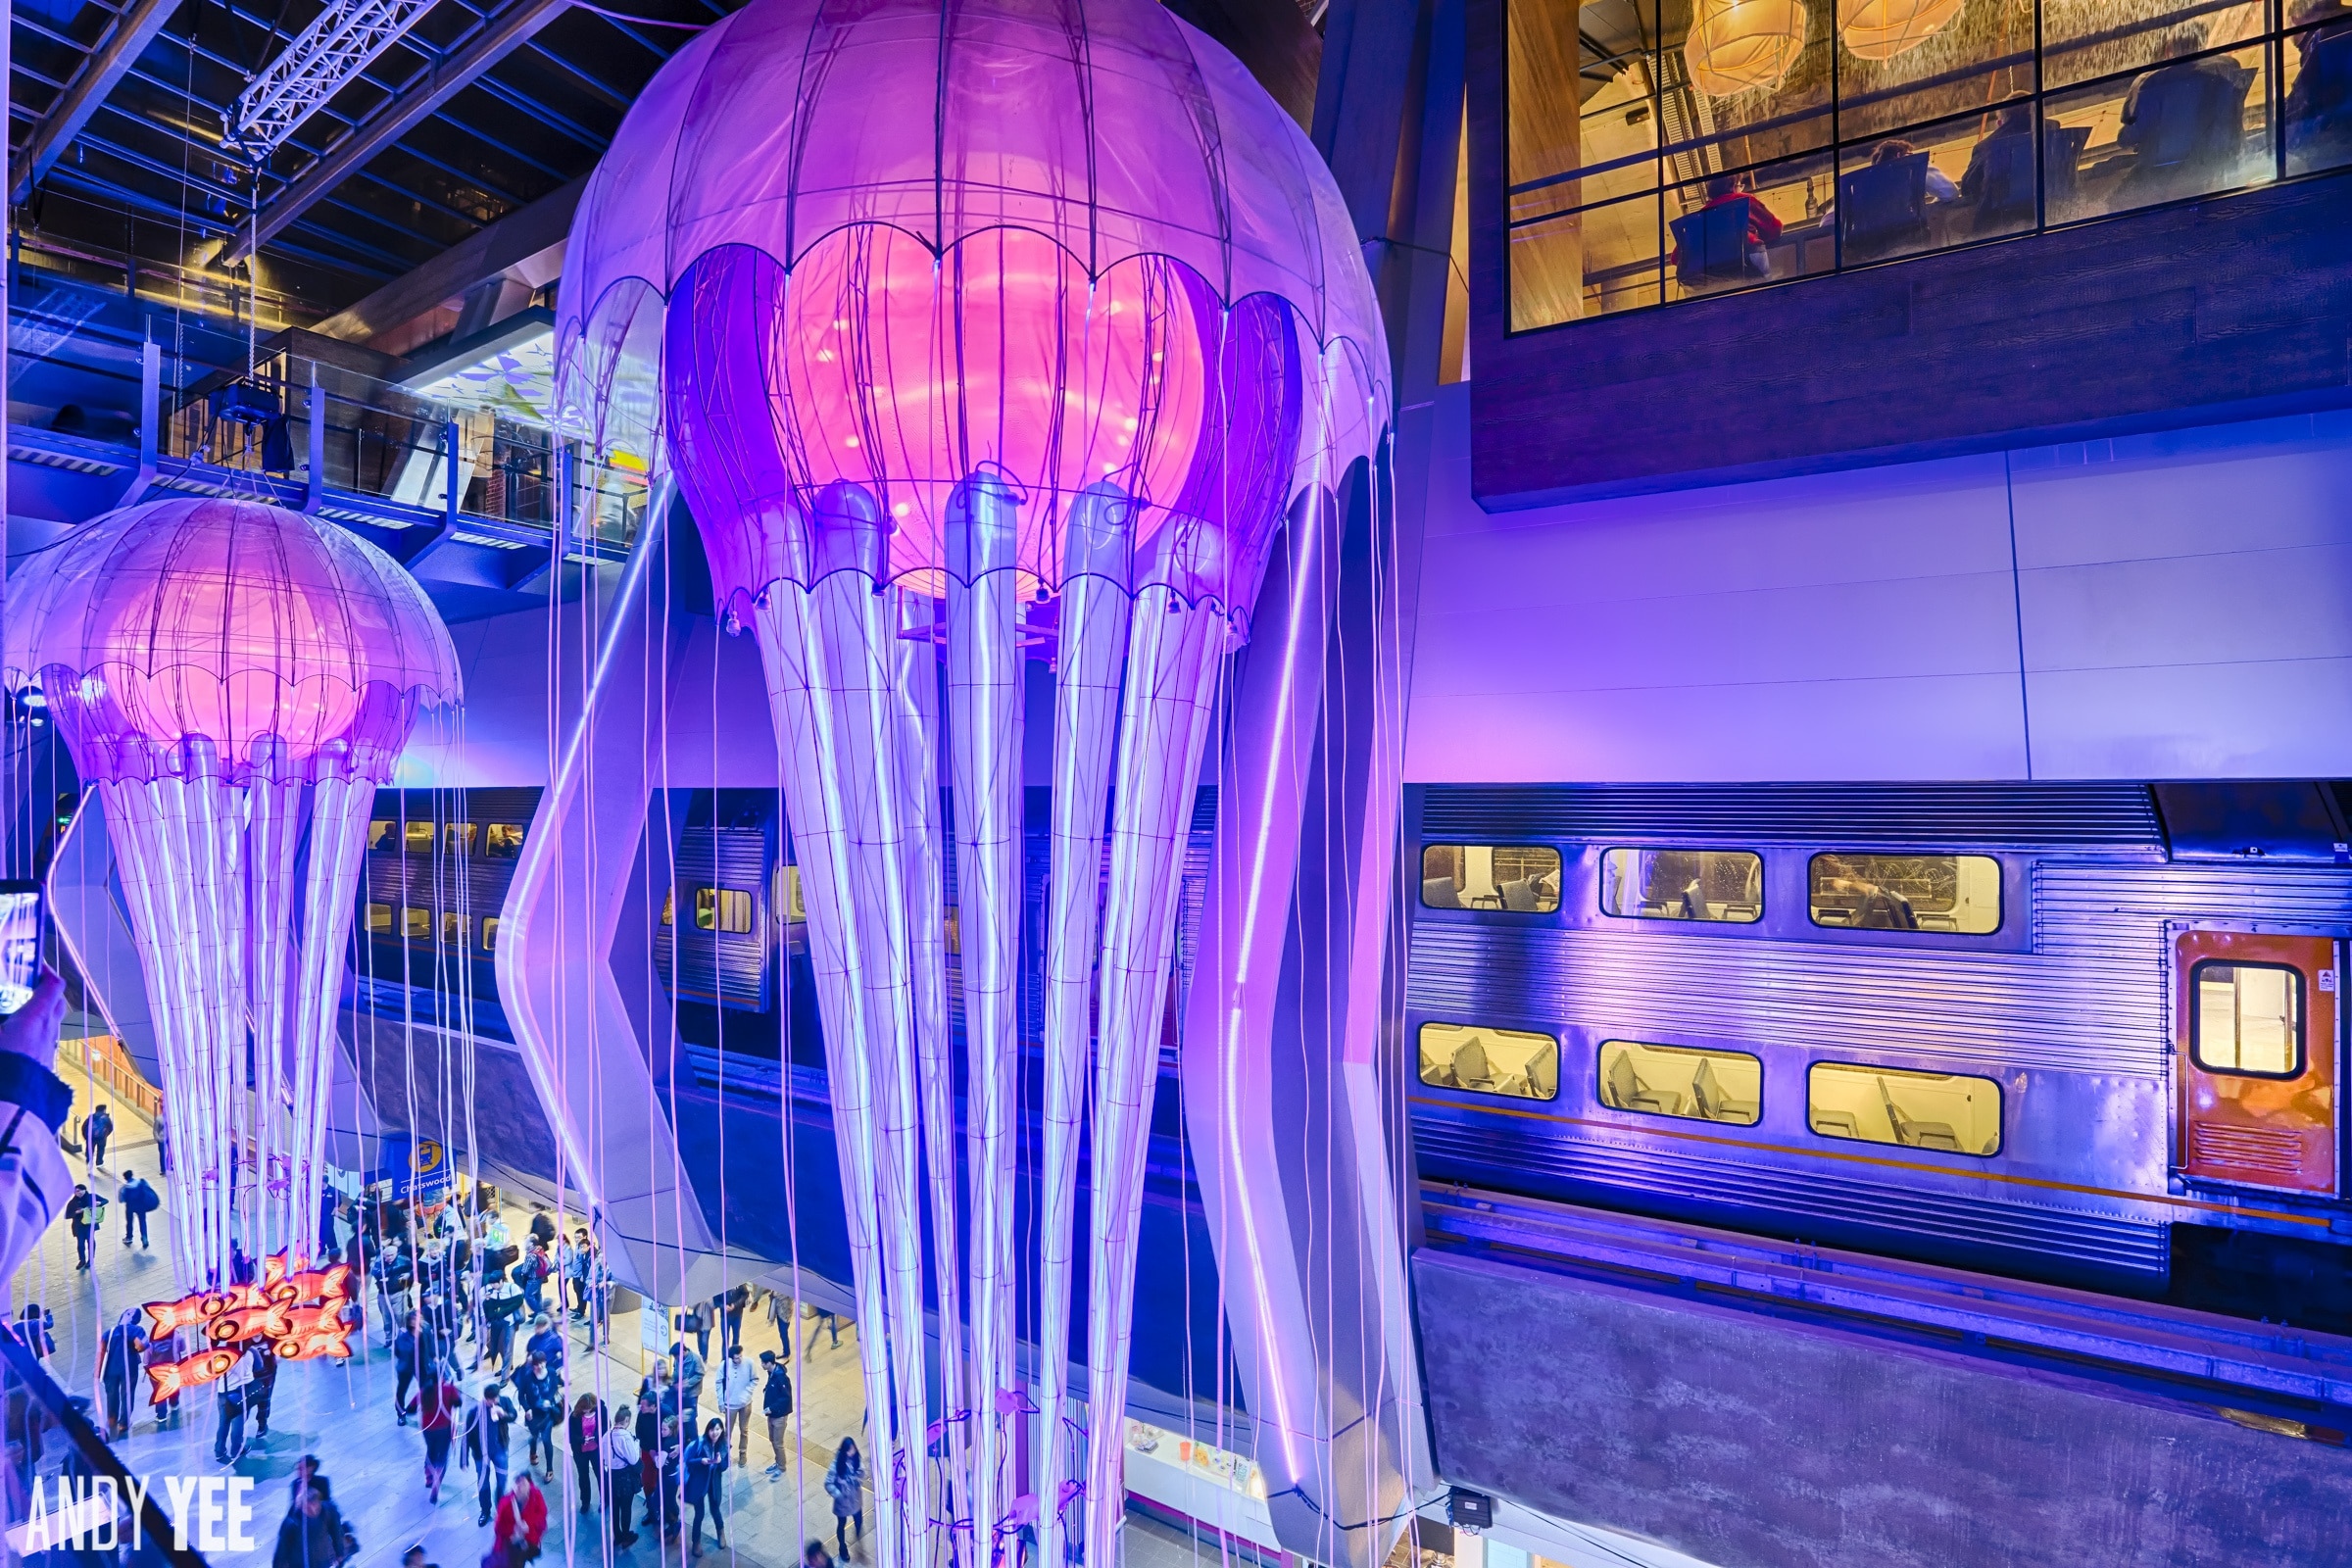 Vivid Sydney has Jellyfish as big as trains! 

#chatswoodinterchange #vividsydney @VividSydney @ChatswoodInterchange @willoughbycity #traveltherenext @traveltherenext #troveon #chatswood